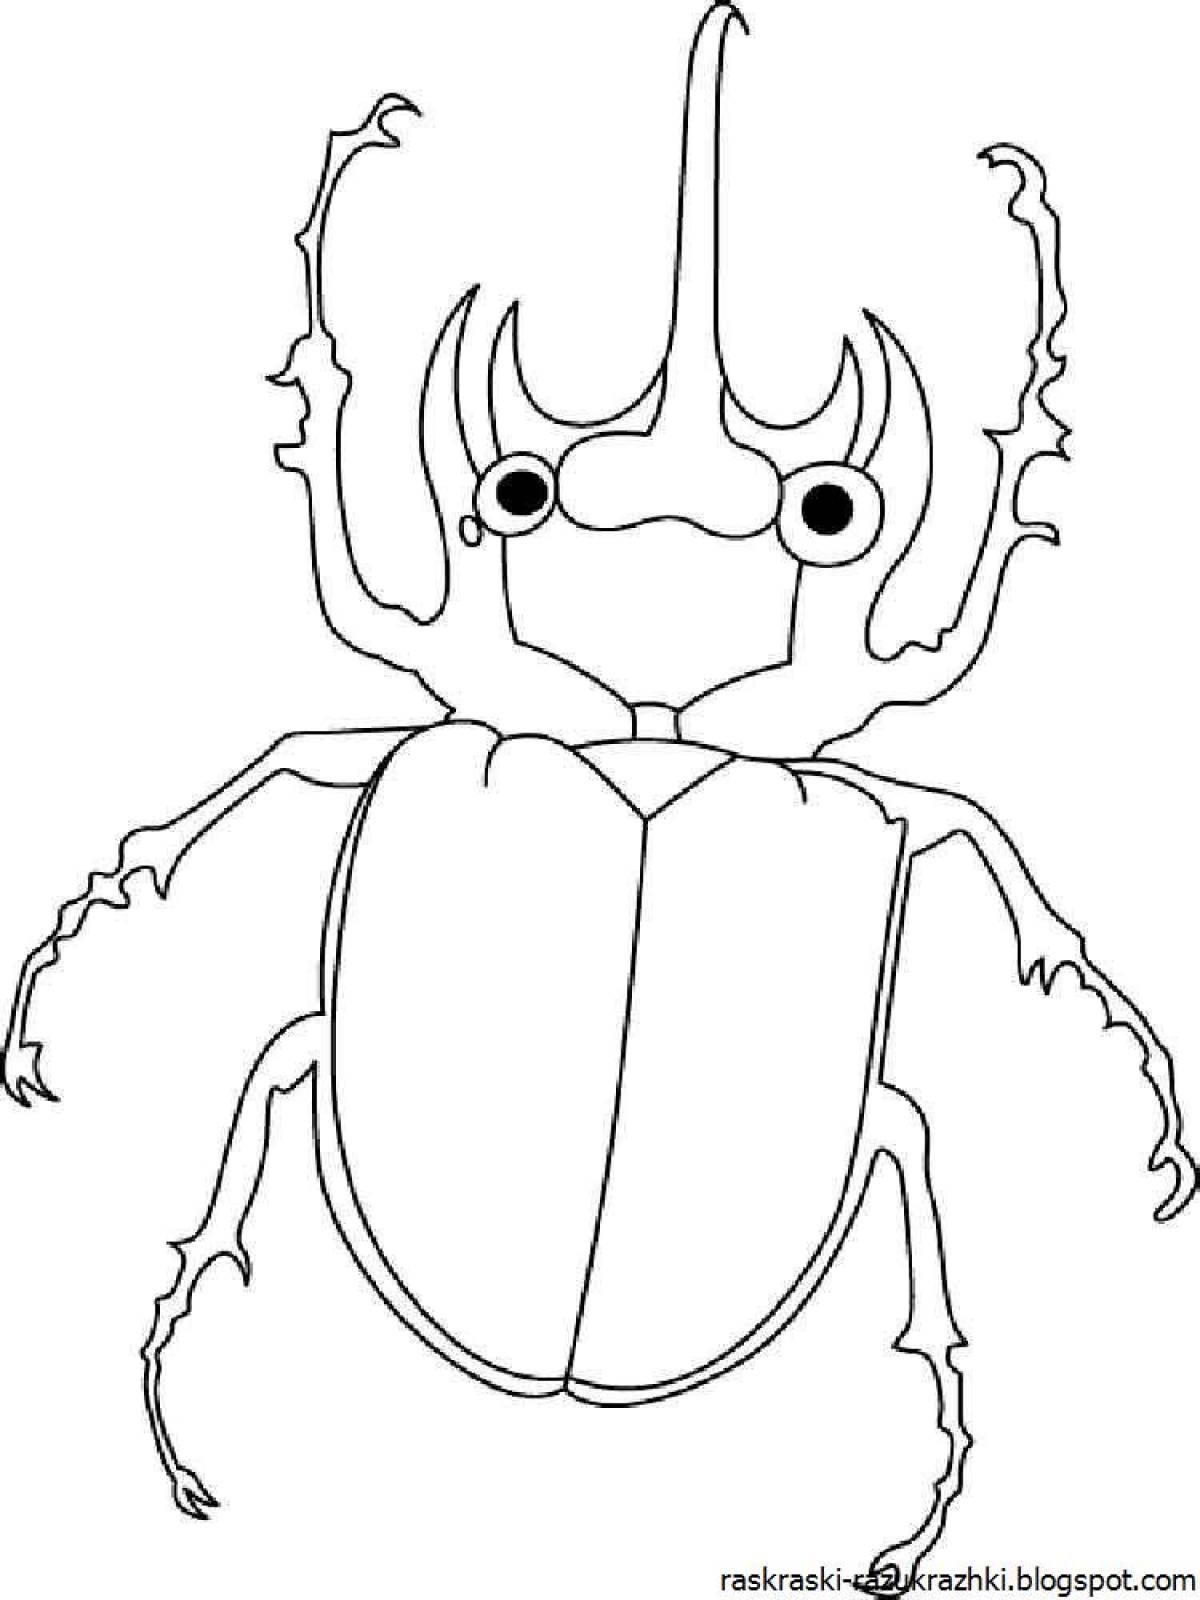 Funny beetle coloring book for kids